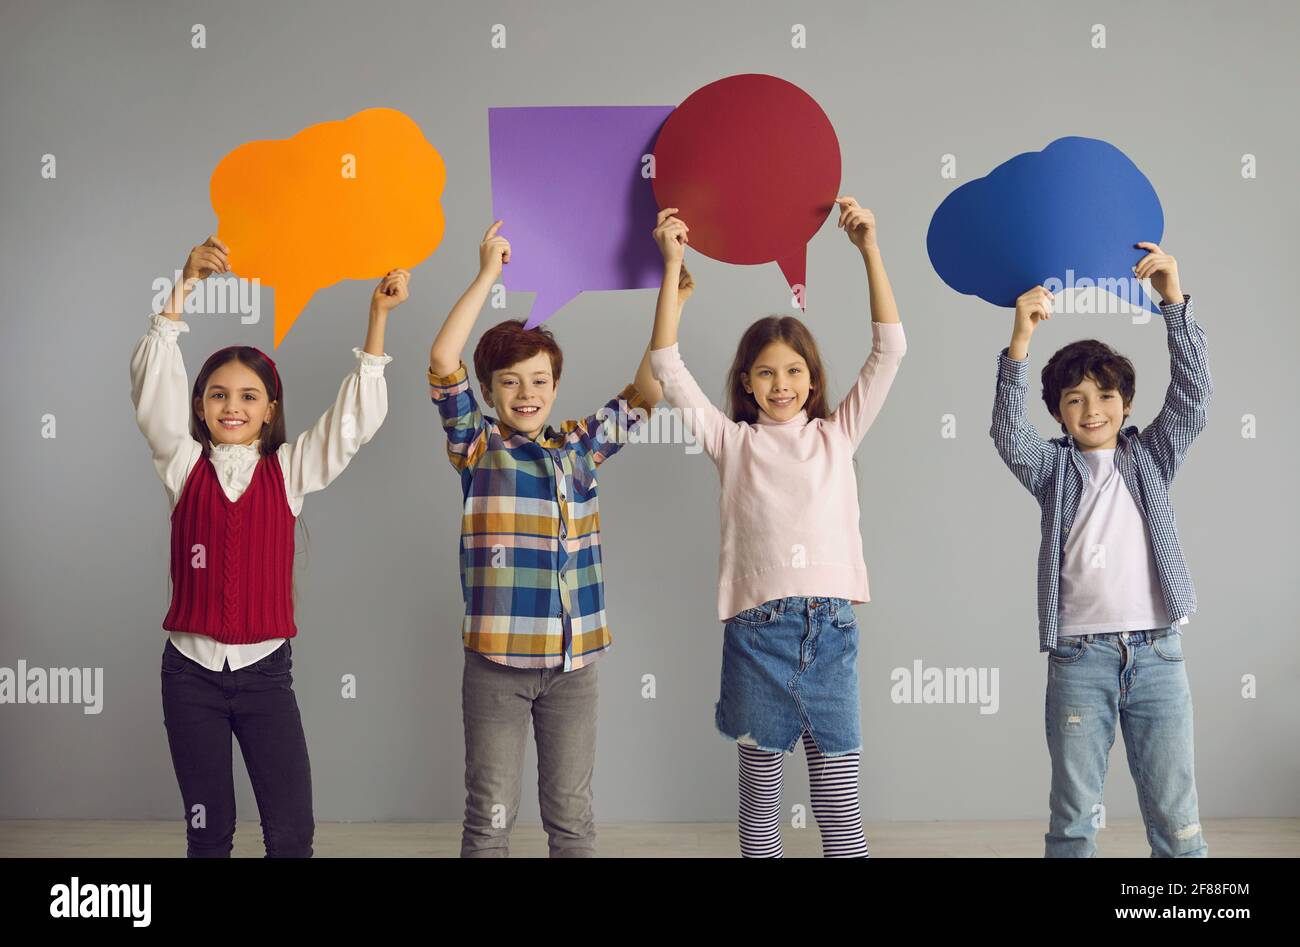 Group of happy kids standing in studio and showing colorful empty speech balloons Stock Photo